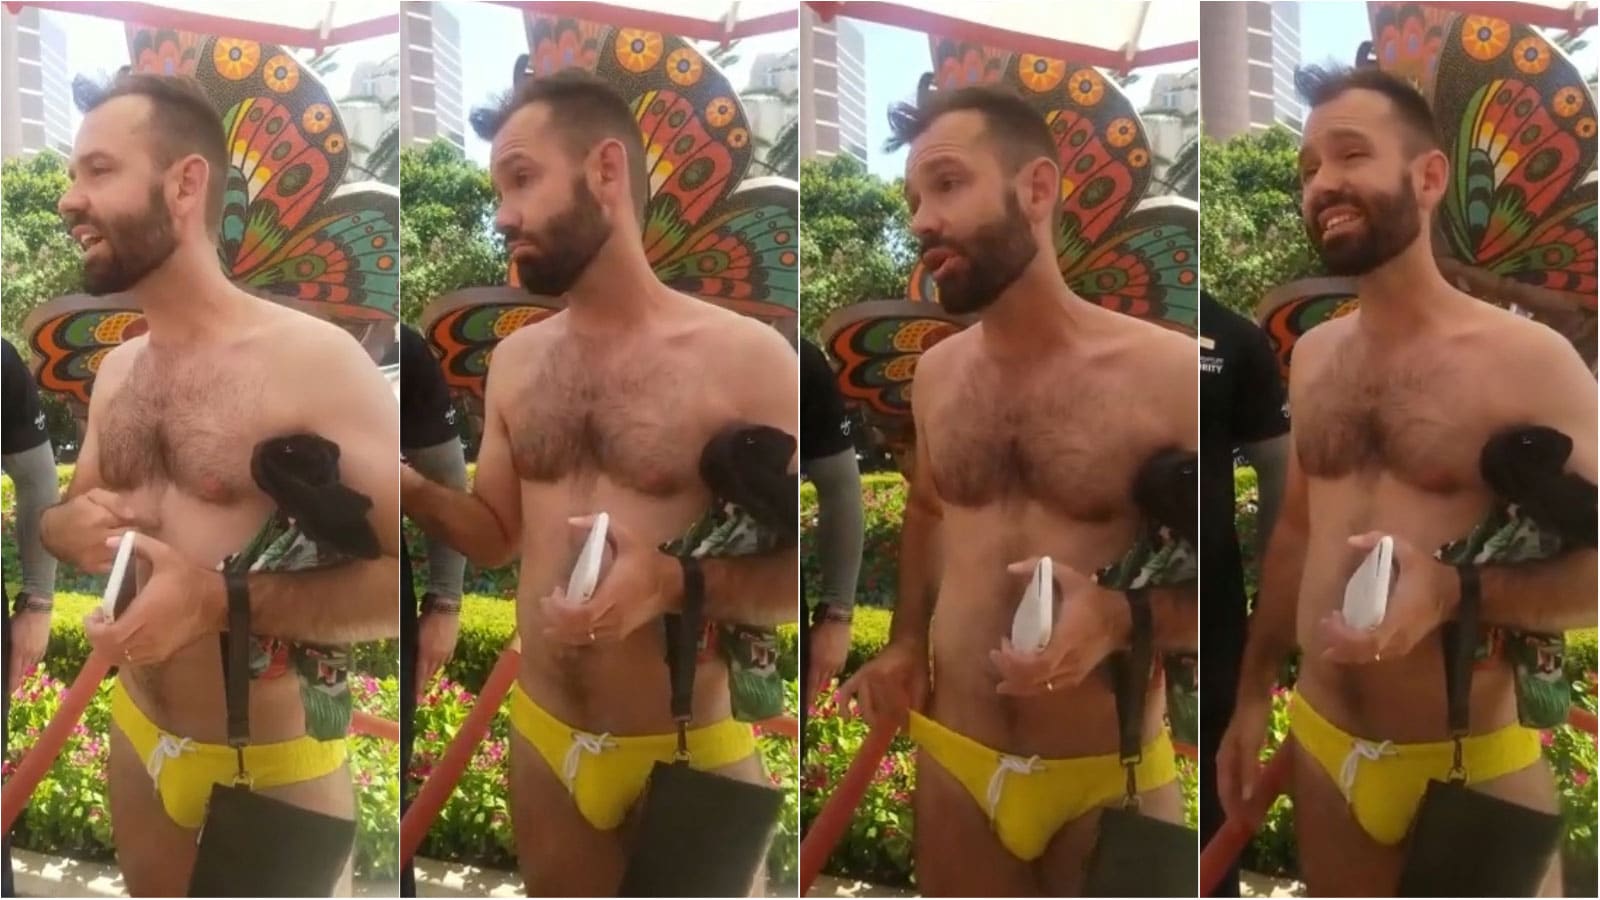 Gay Man Kicked Out of Las Vegas Pool for Wearing a 'Speedo'